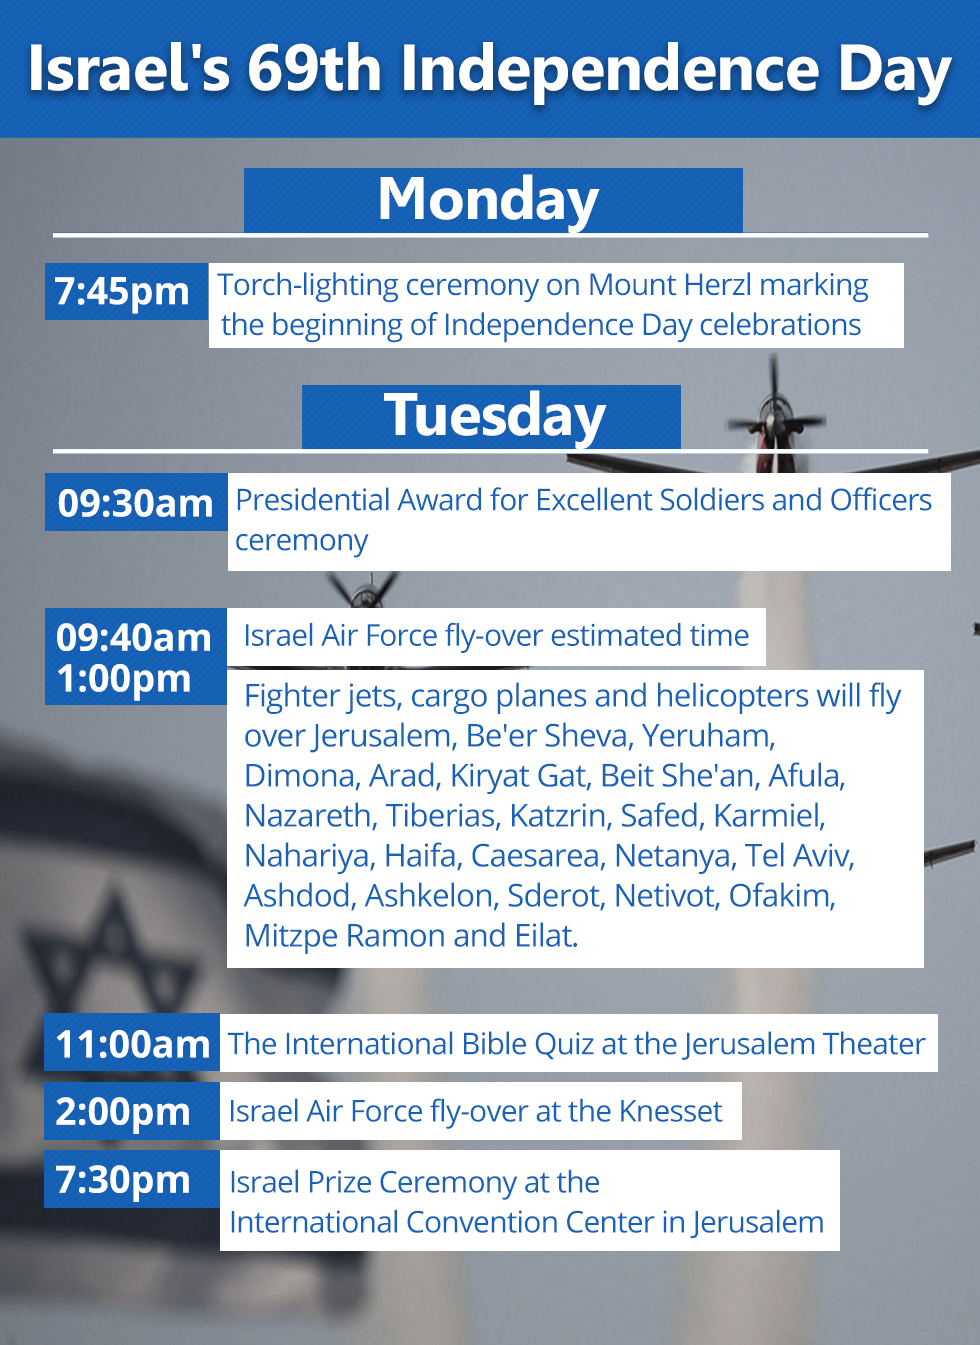 Itinerary for Israel's national Memorial Day